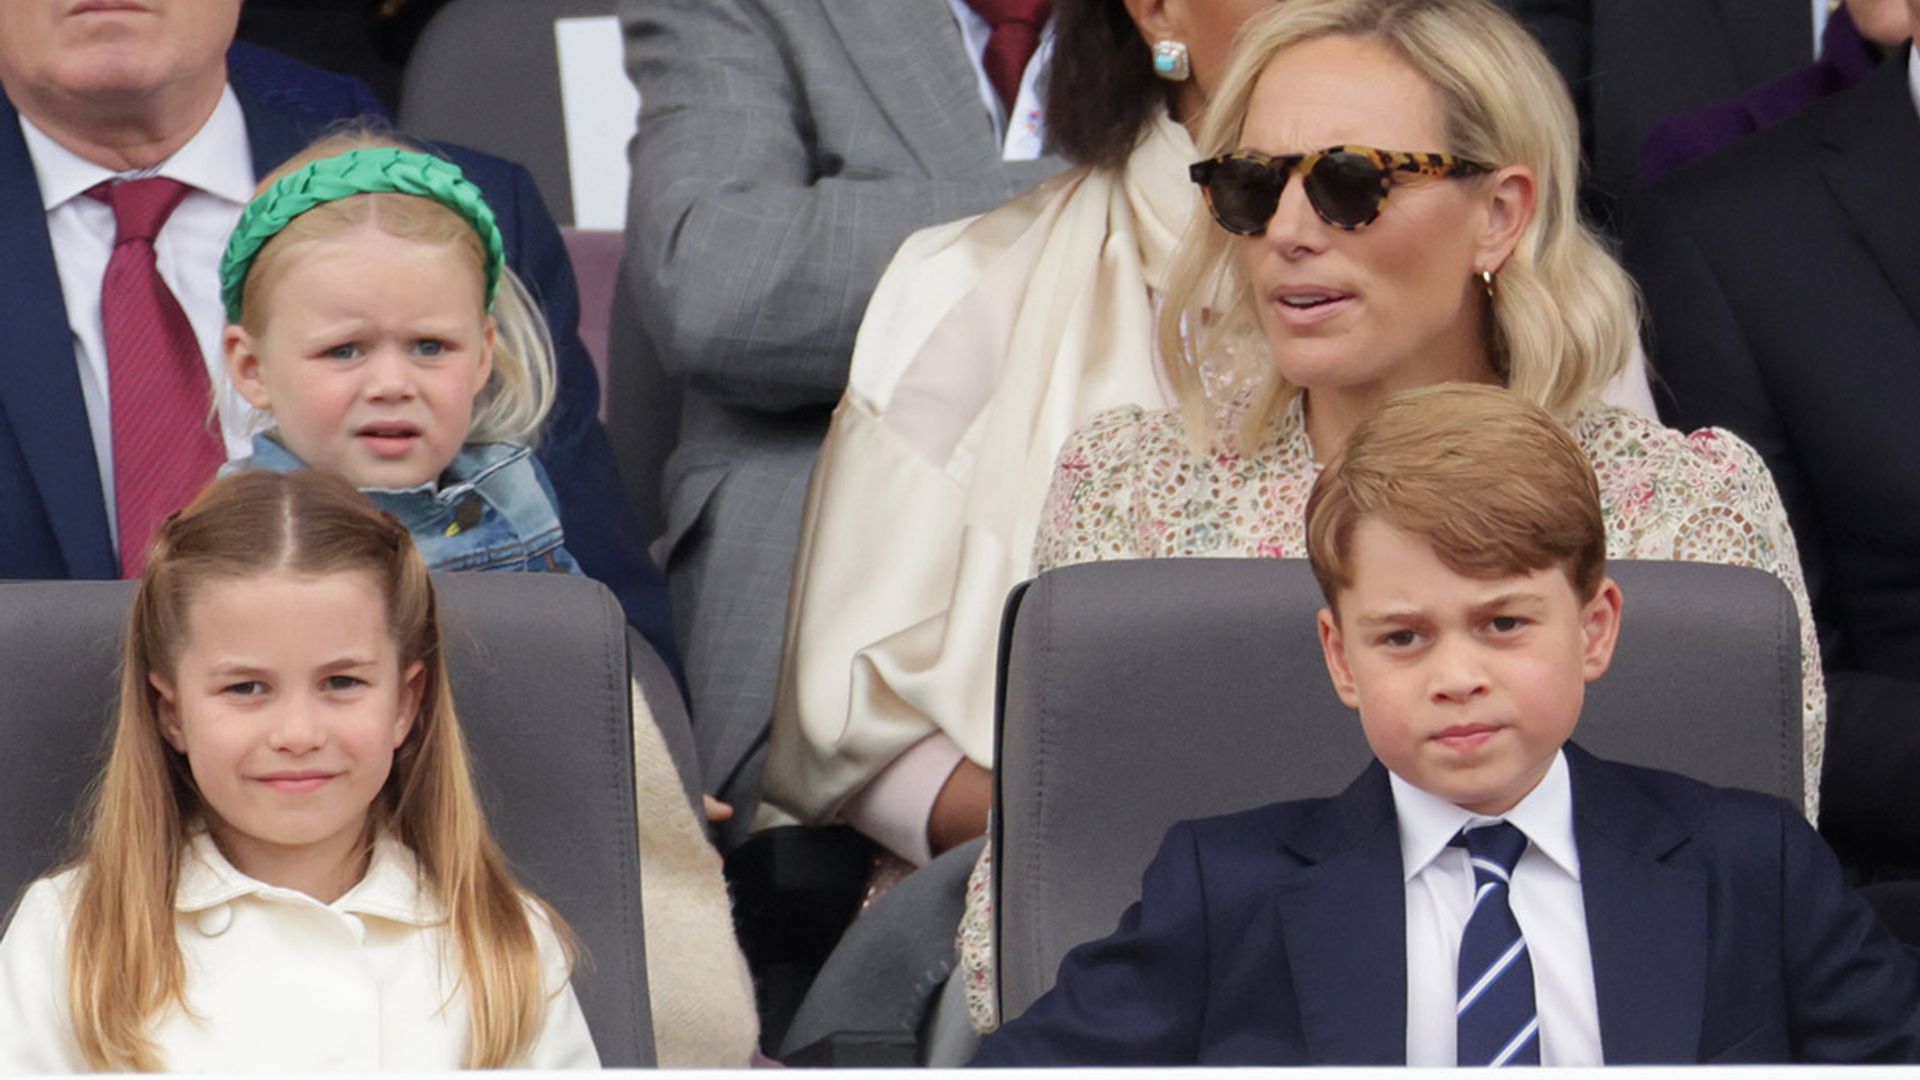 Princess Charlotte copies Zara Tindall at Jubilee Pageant and it's adorable